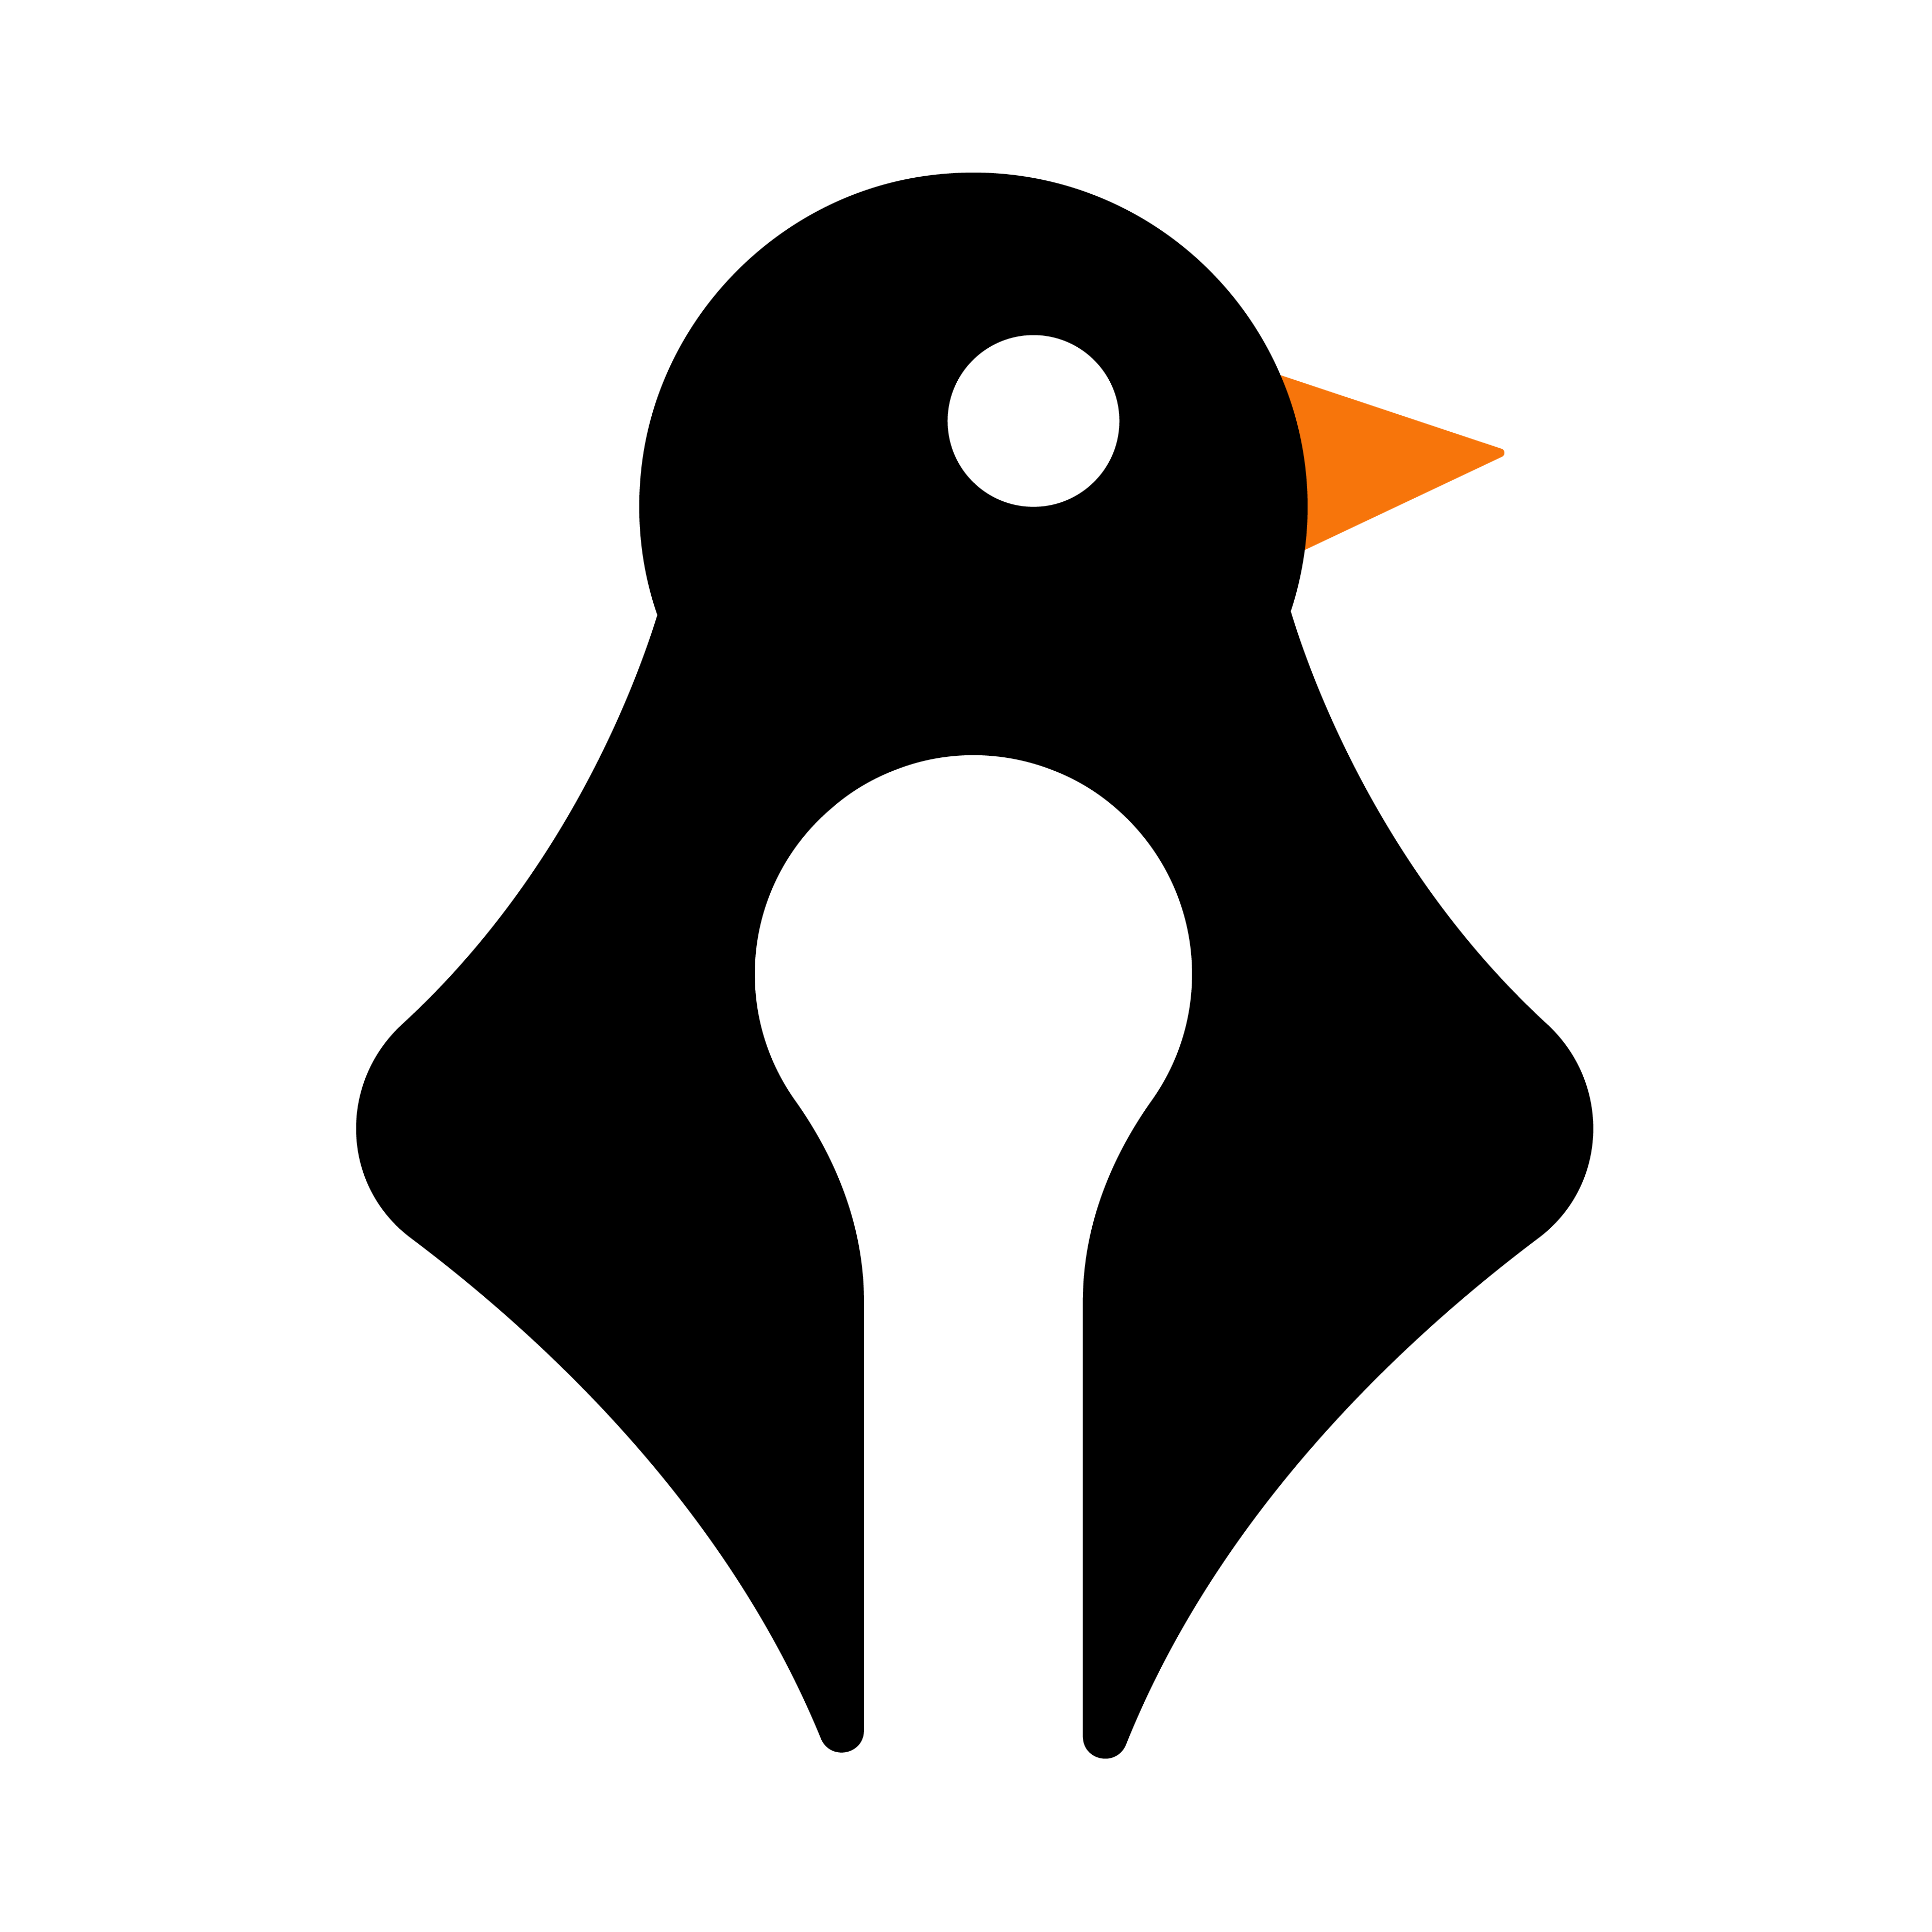 pen-guin logo design by logo designer logorilla for your inspiration and for the worlds largest logo competition